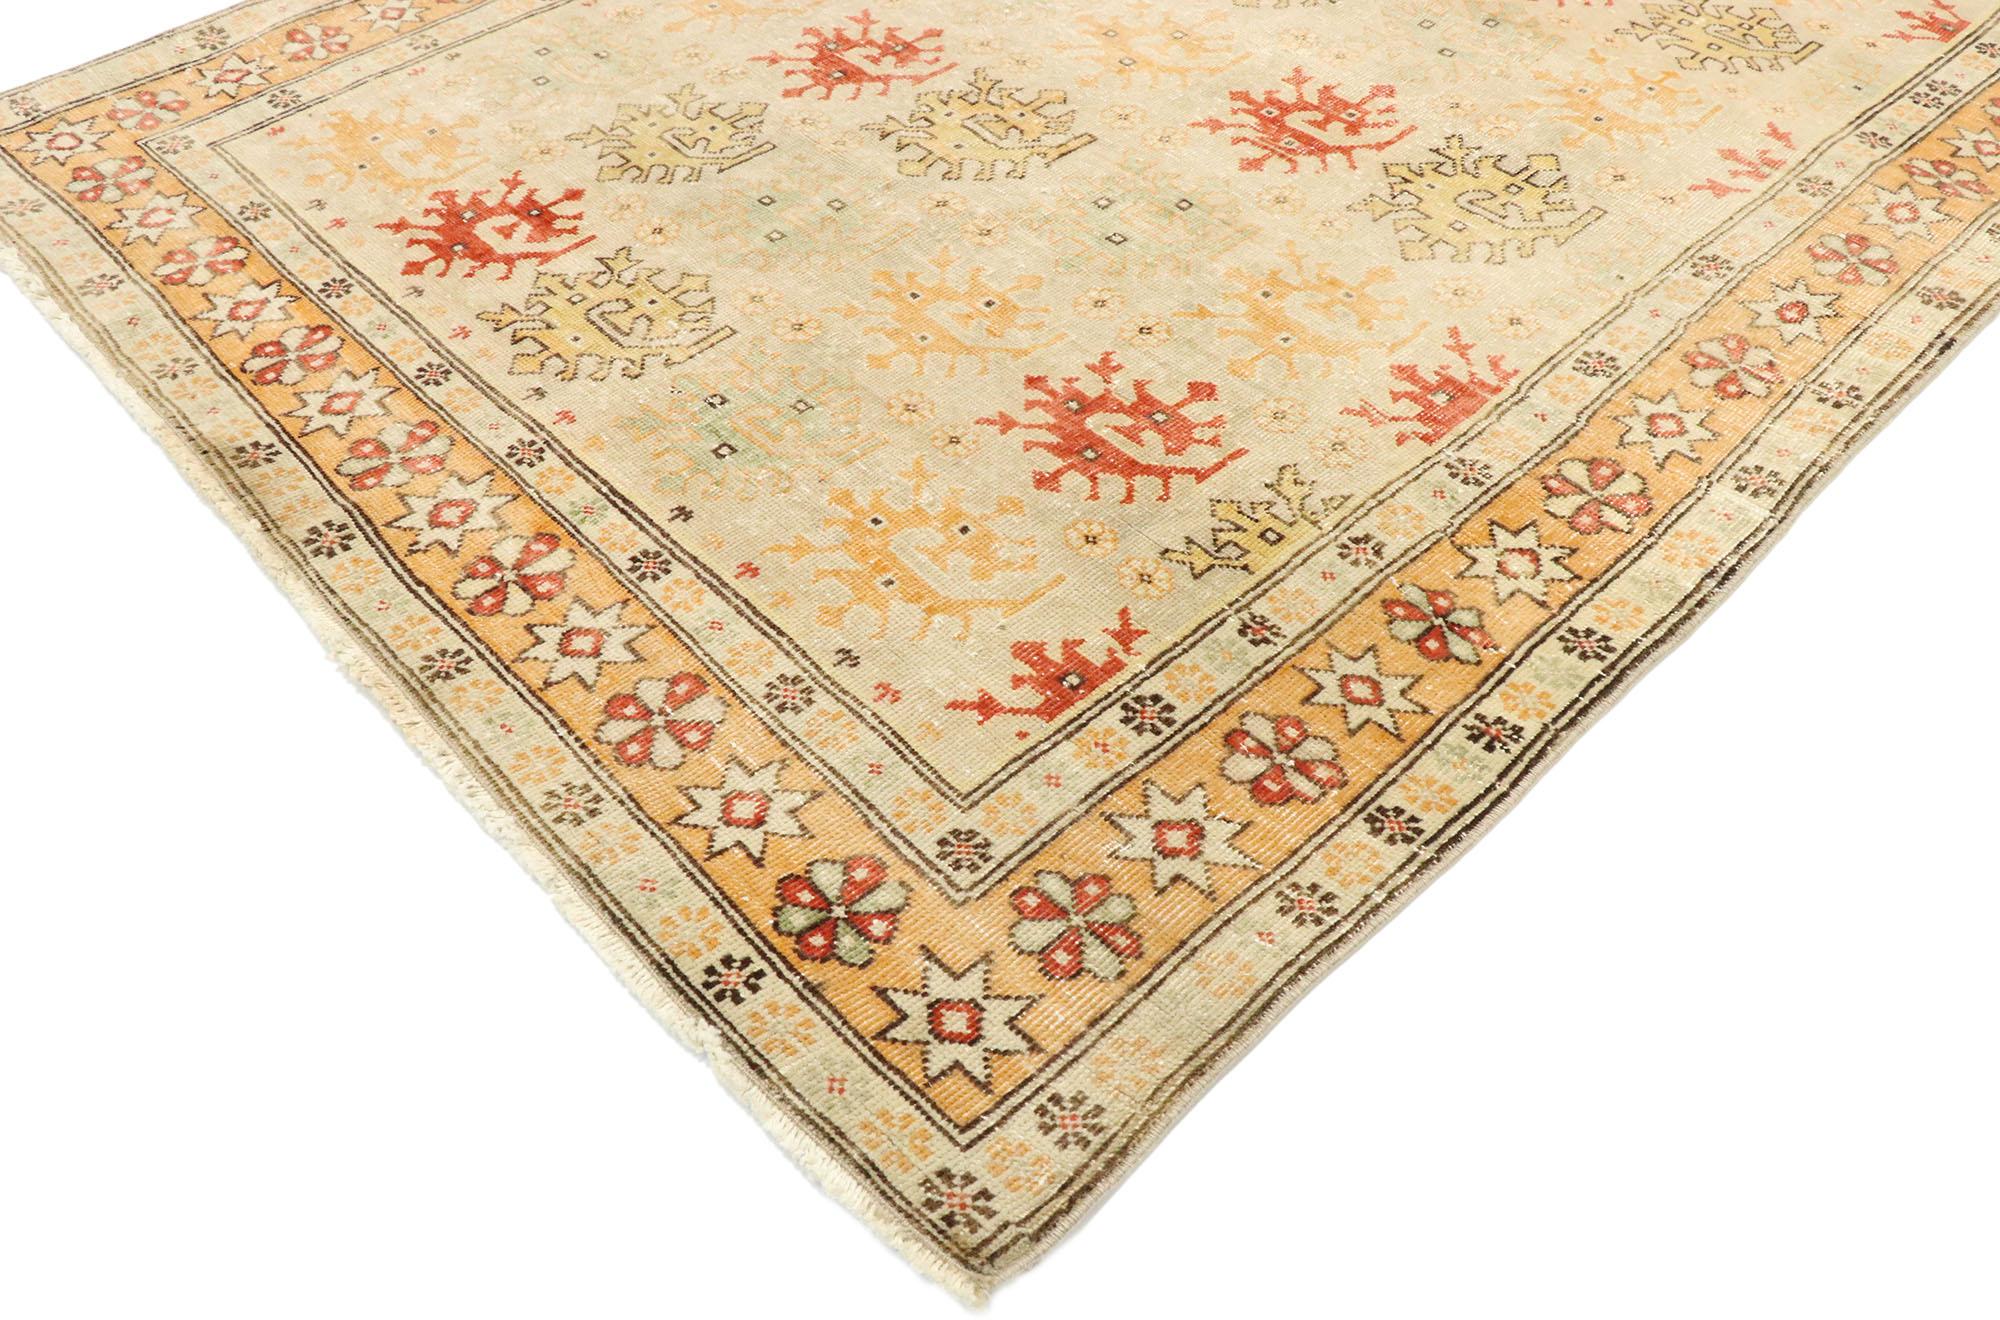 Hand-Knotted Distressed Vintage Turkish Oushak Rug with Rustic Arts & Crafts Style